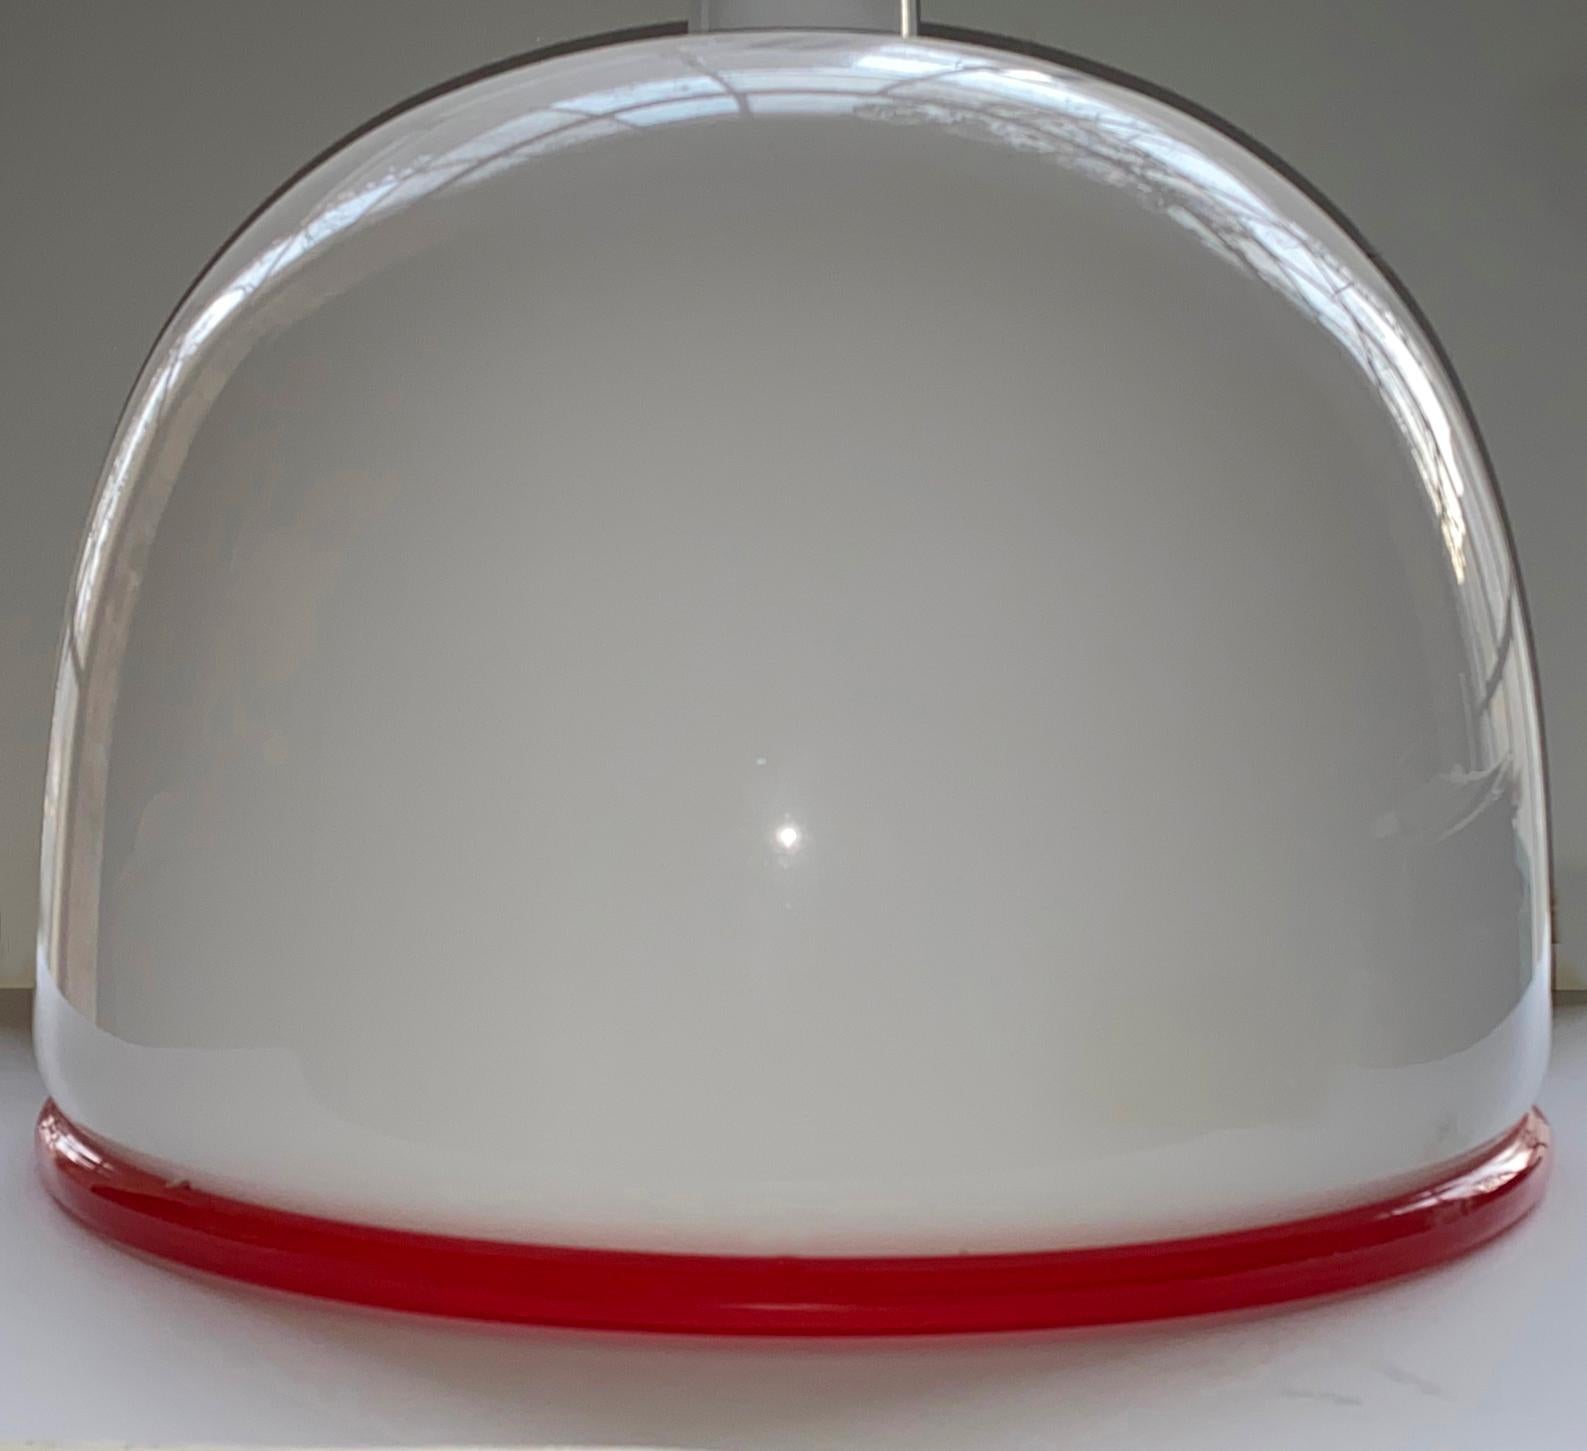 Murano Glass Pendant in bell shape.
Pendant lamp designed by Ettrre Sottsass in 1970s. Opal glass with applicated red glass edge ribbon. Glass perfect condition. The size of the opal glass dome is Height : 33 cm and Diameter 42 cm. The rest of